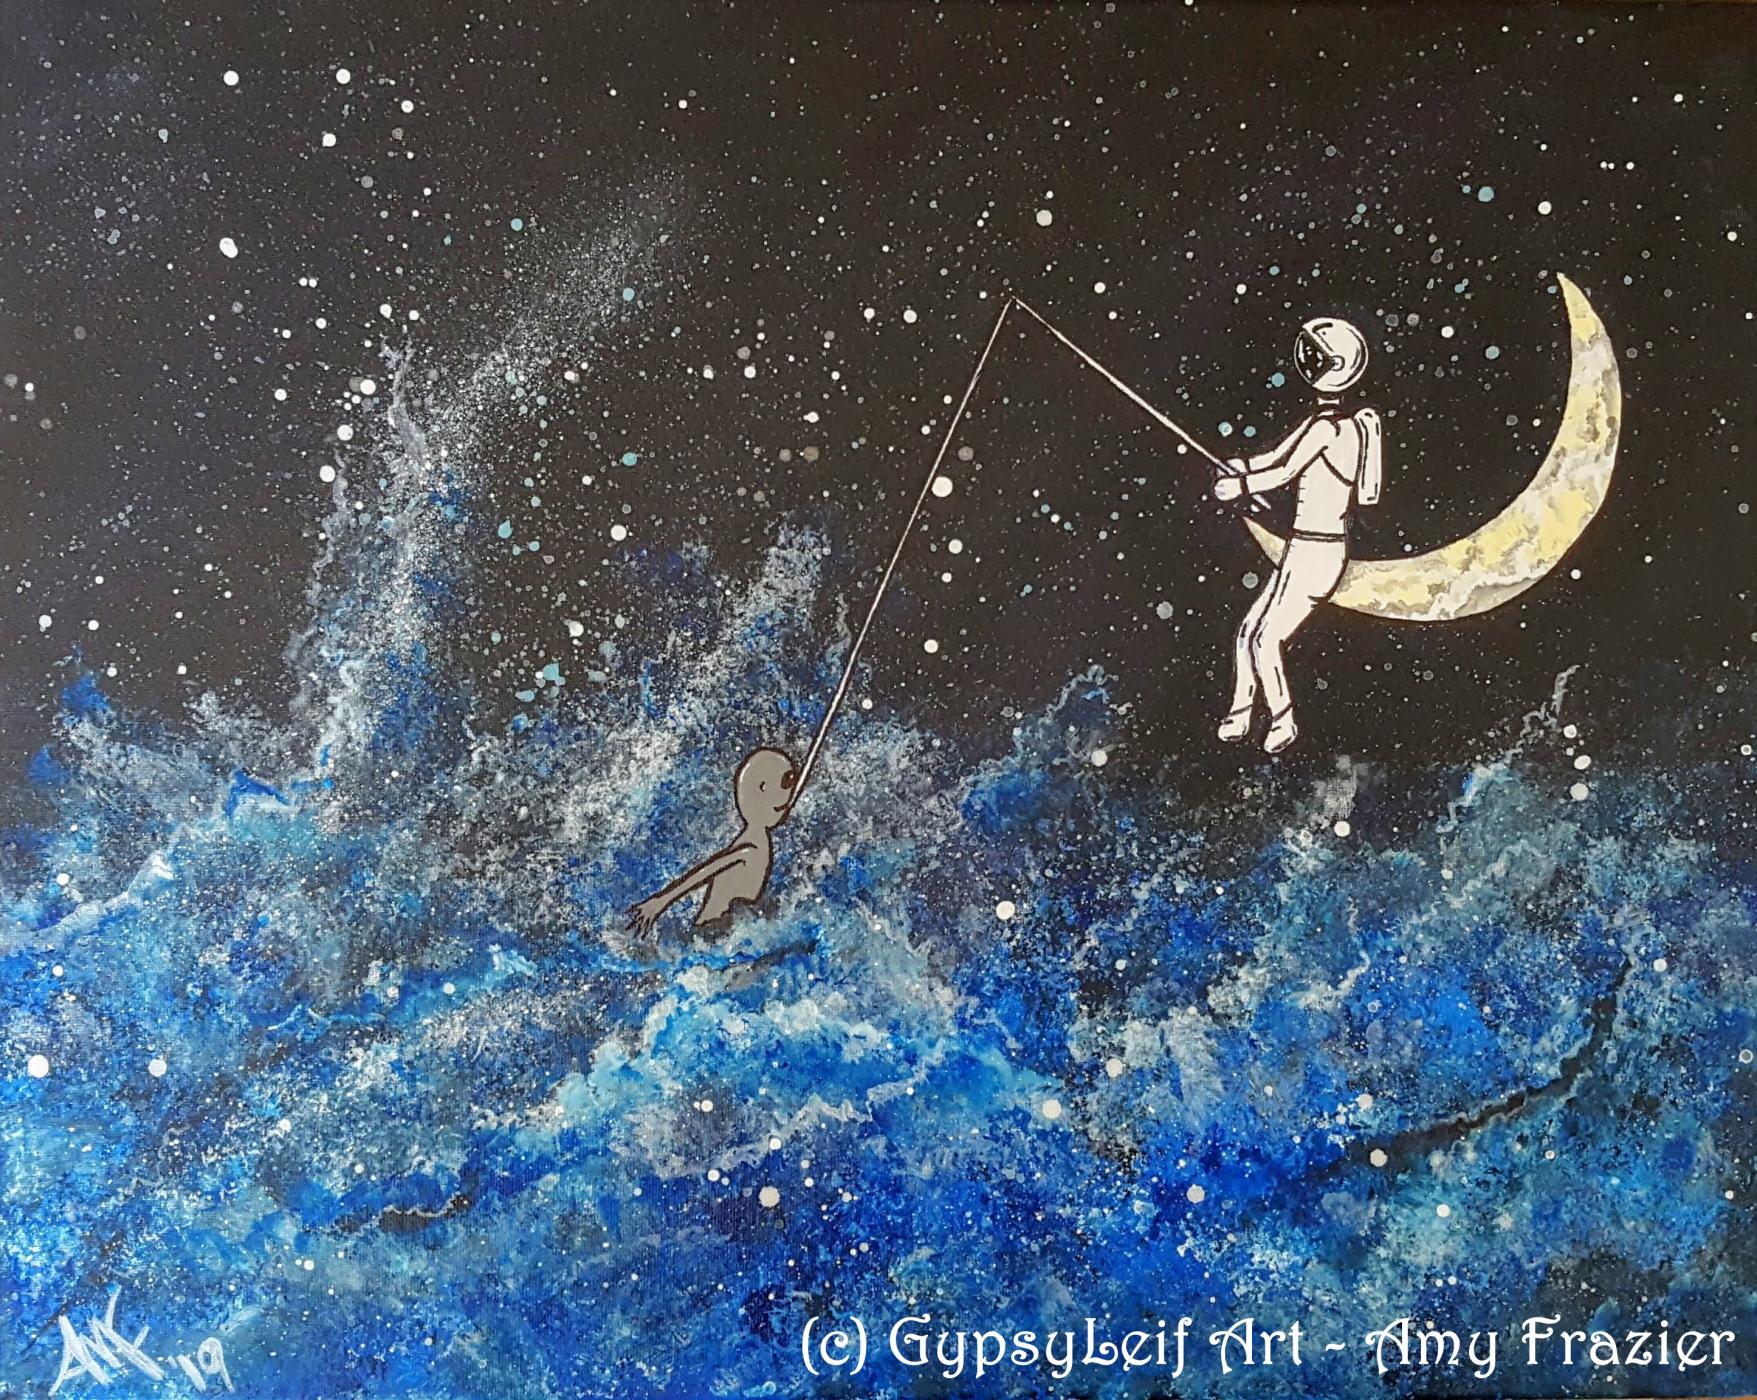 Here Fishy Fishy - Astronaut and Alien Space Painting Photo Print